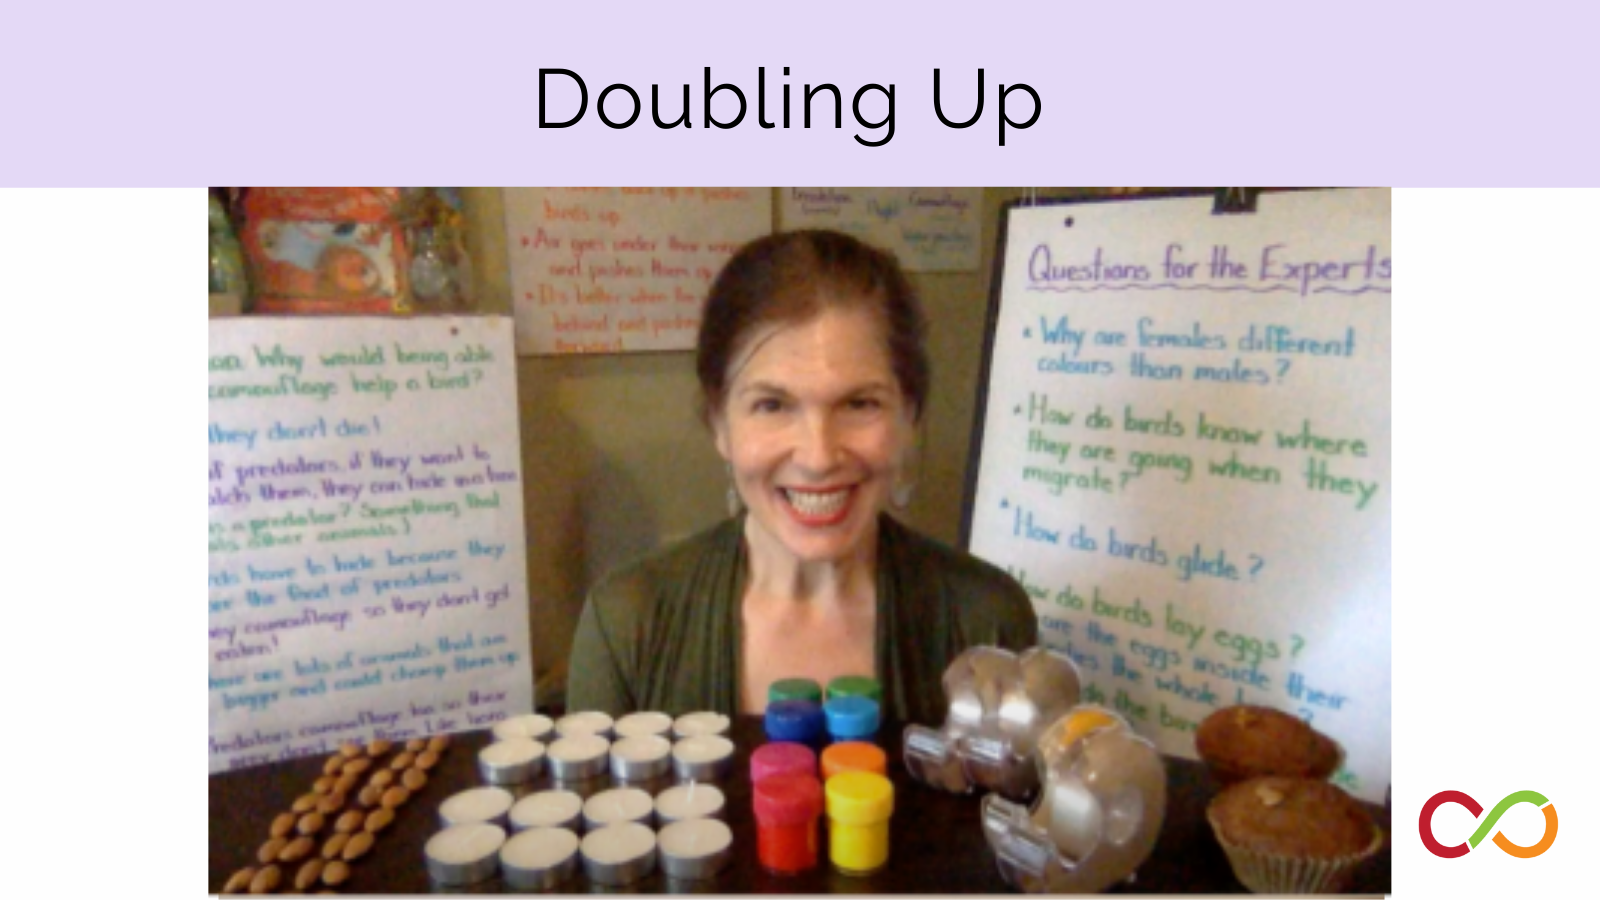 An image linking to the doubling up lesson